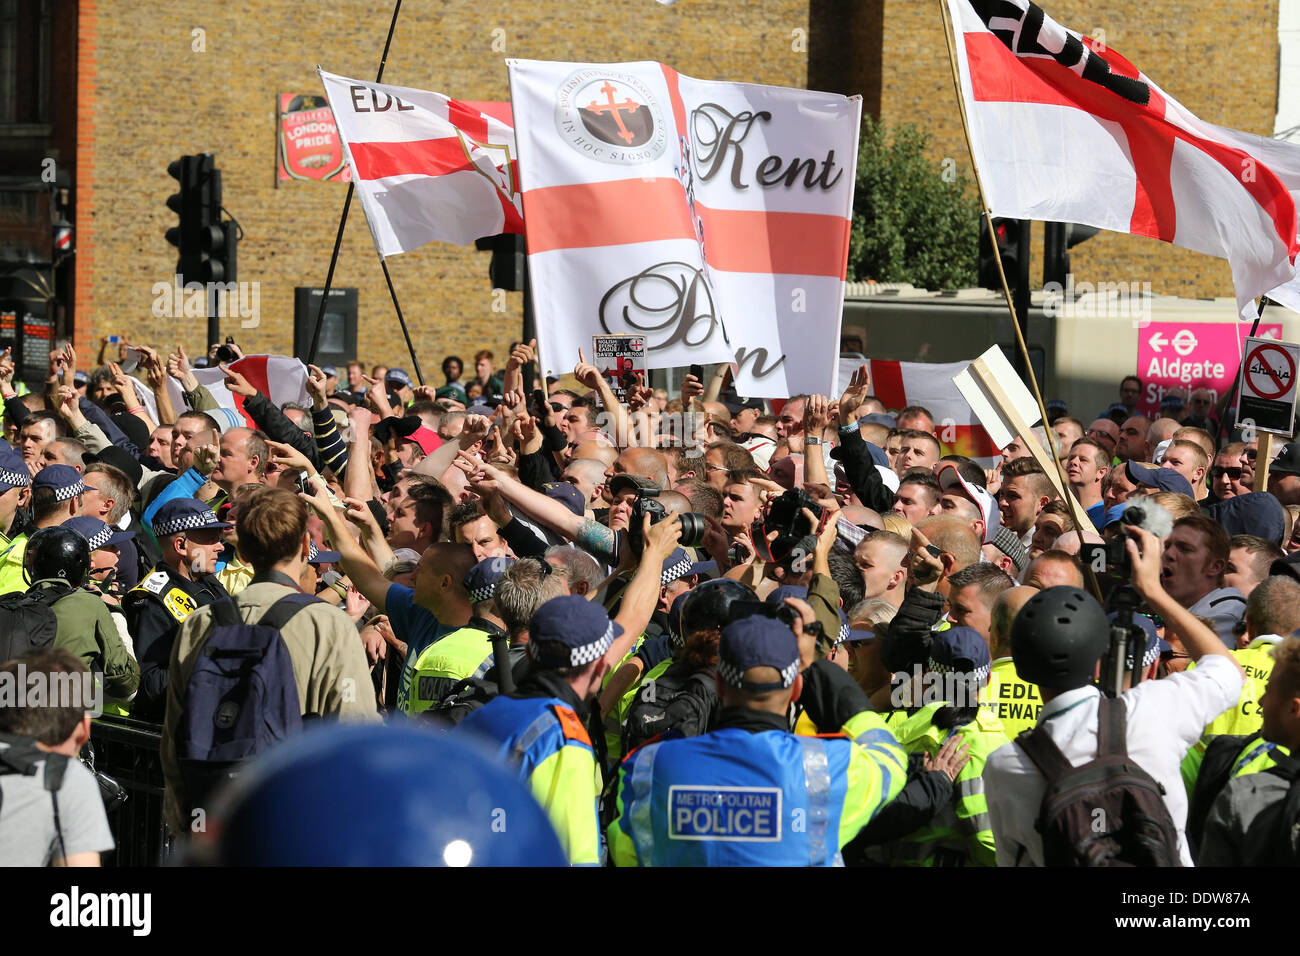 London, UK. 7th September 2013. The Right-Wing Pressure Group, The English Defence League, March and rally against Sharia law on the outskirts of Tower Hamlets. London, United Kingdom, 07/09/2013  Credit:  Mario Mitsis / Alamy Live News Stock Photo